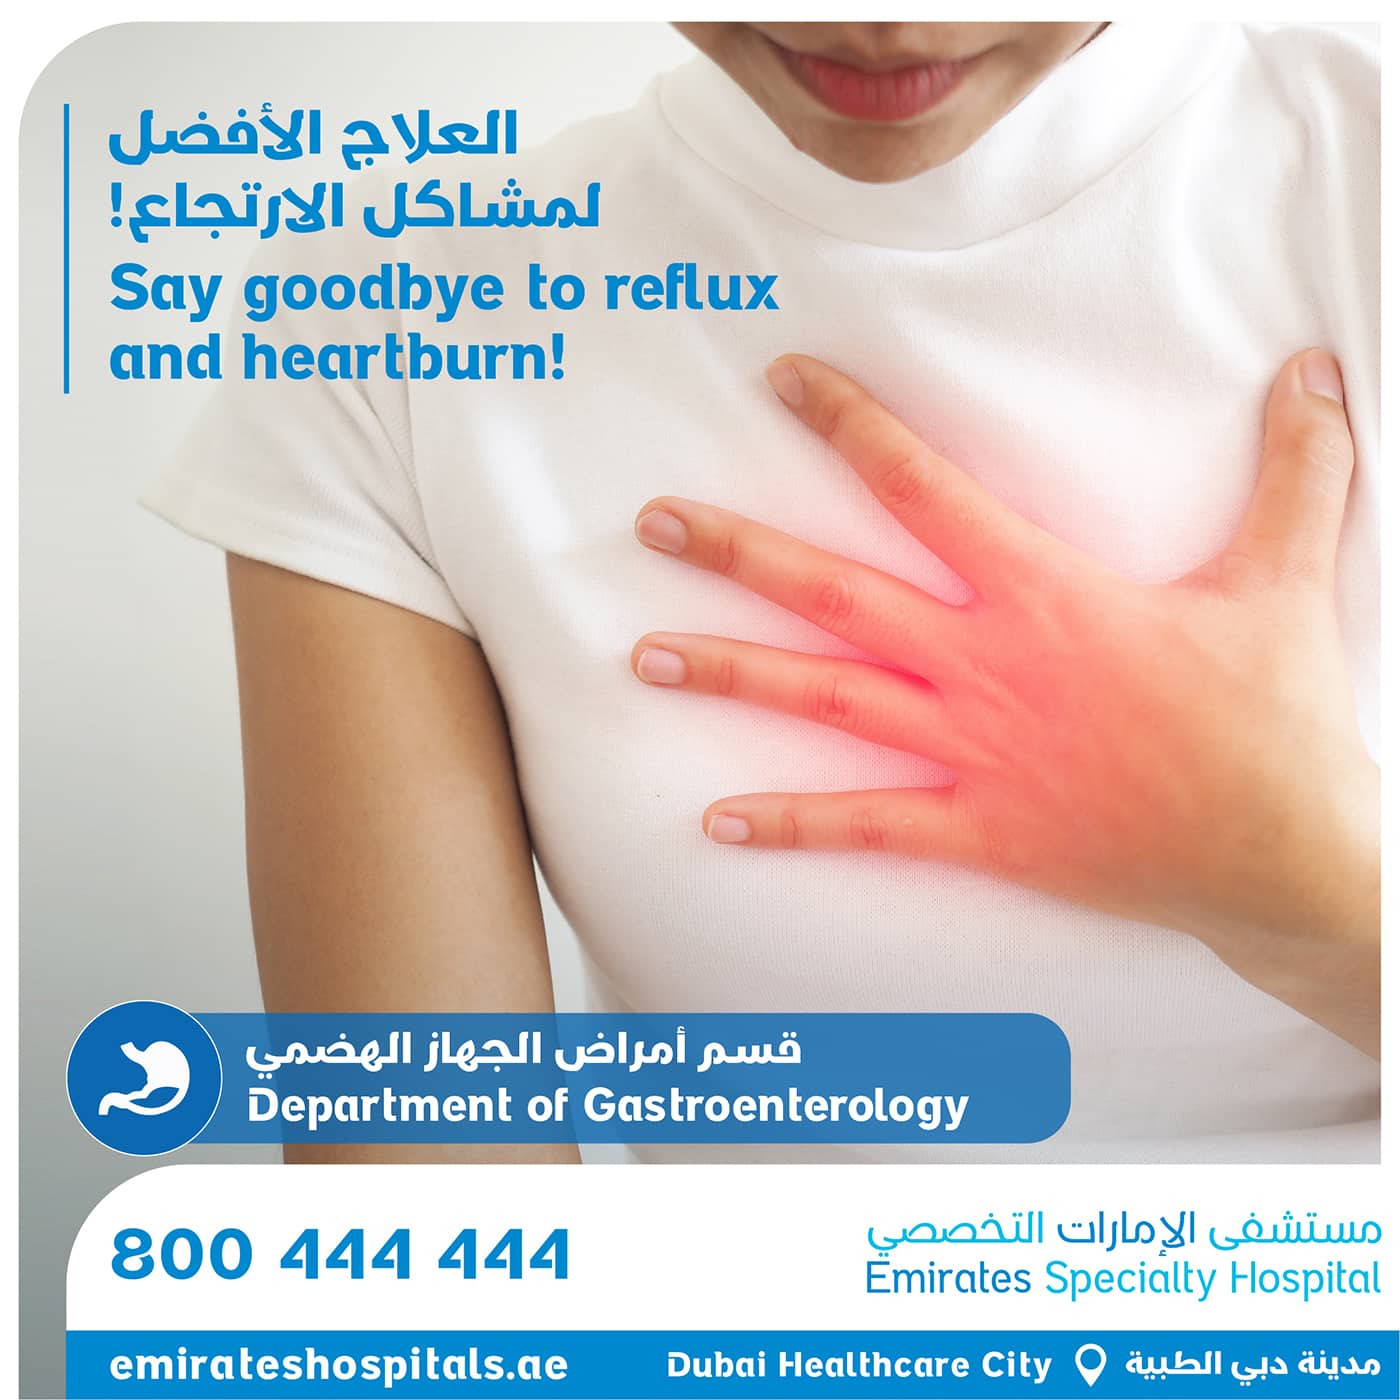 Say Goodbye to reflux and Heartburn